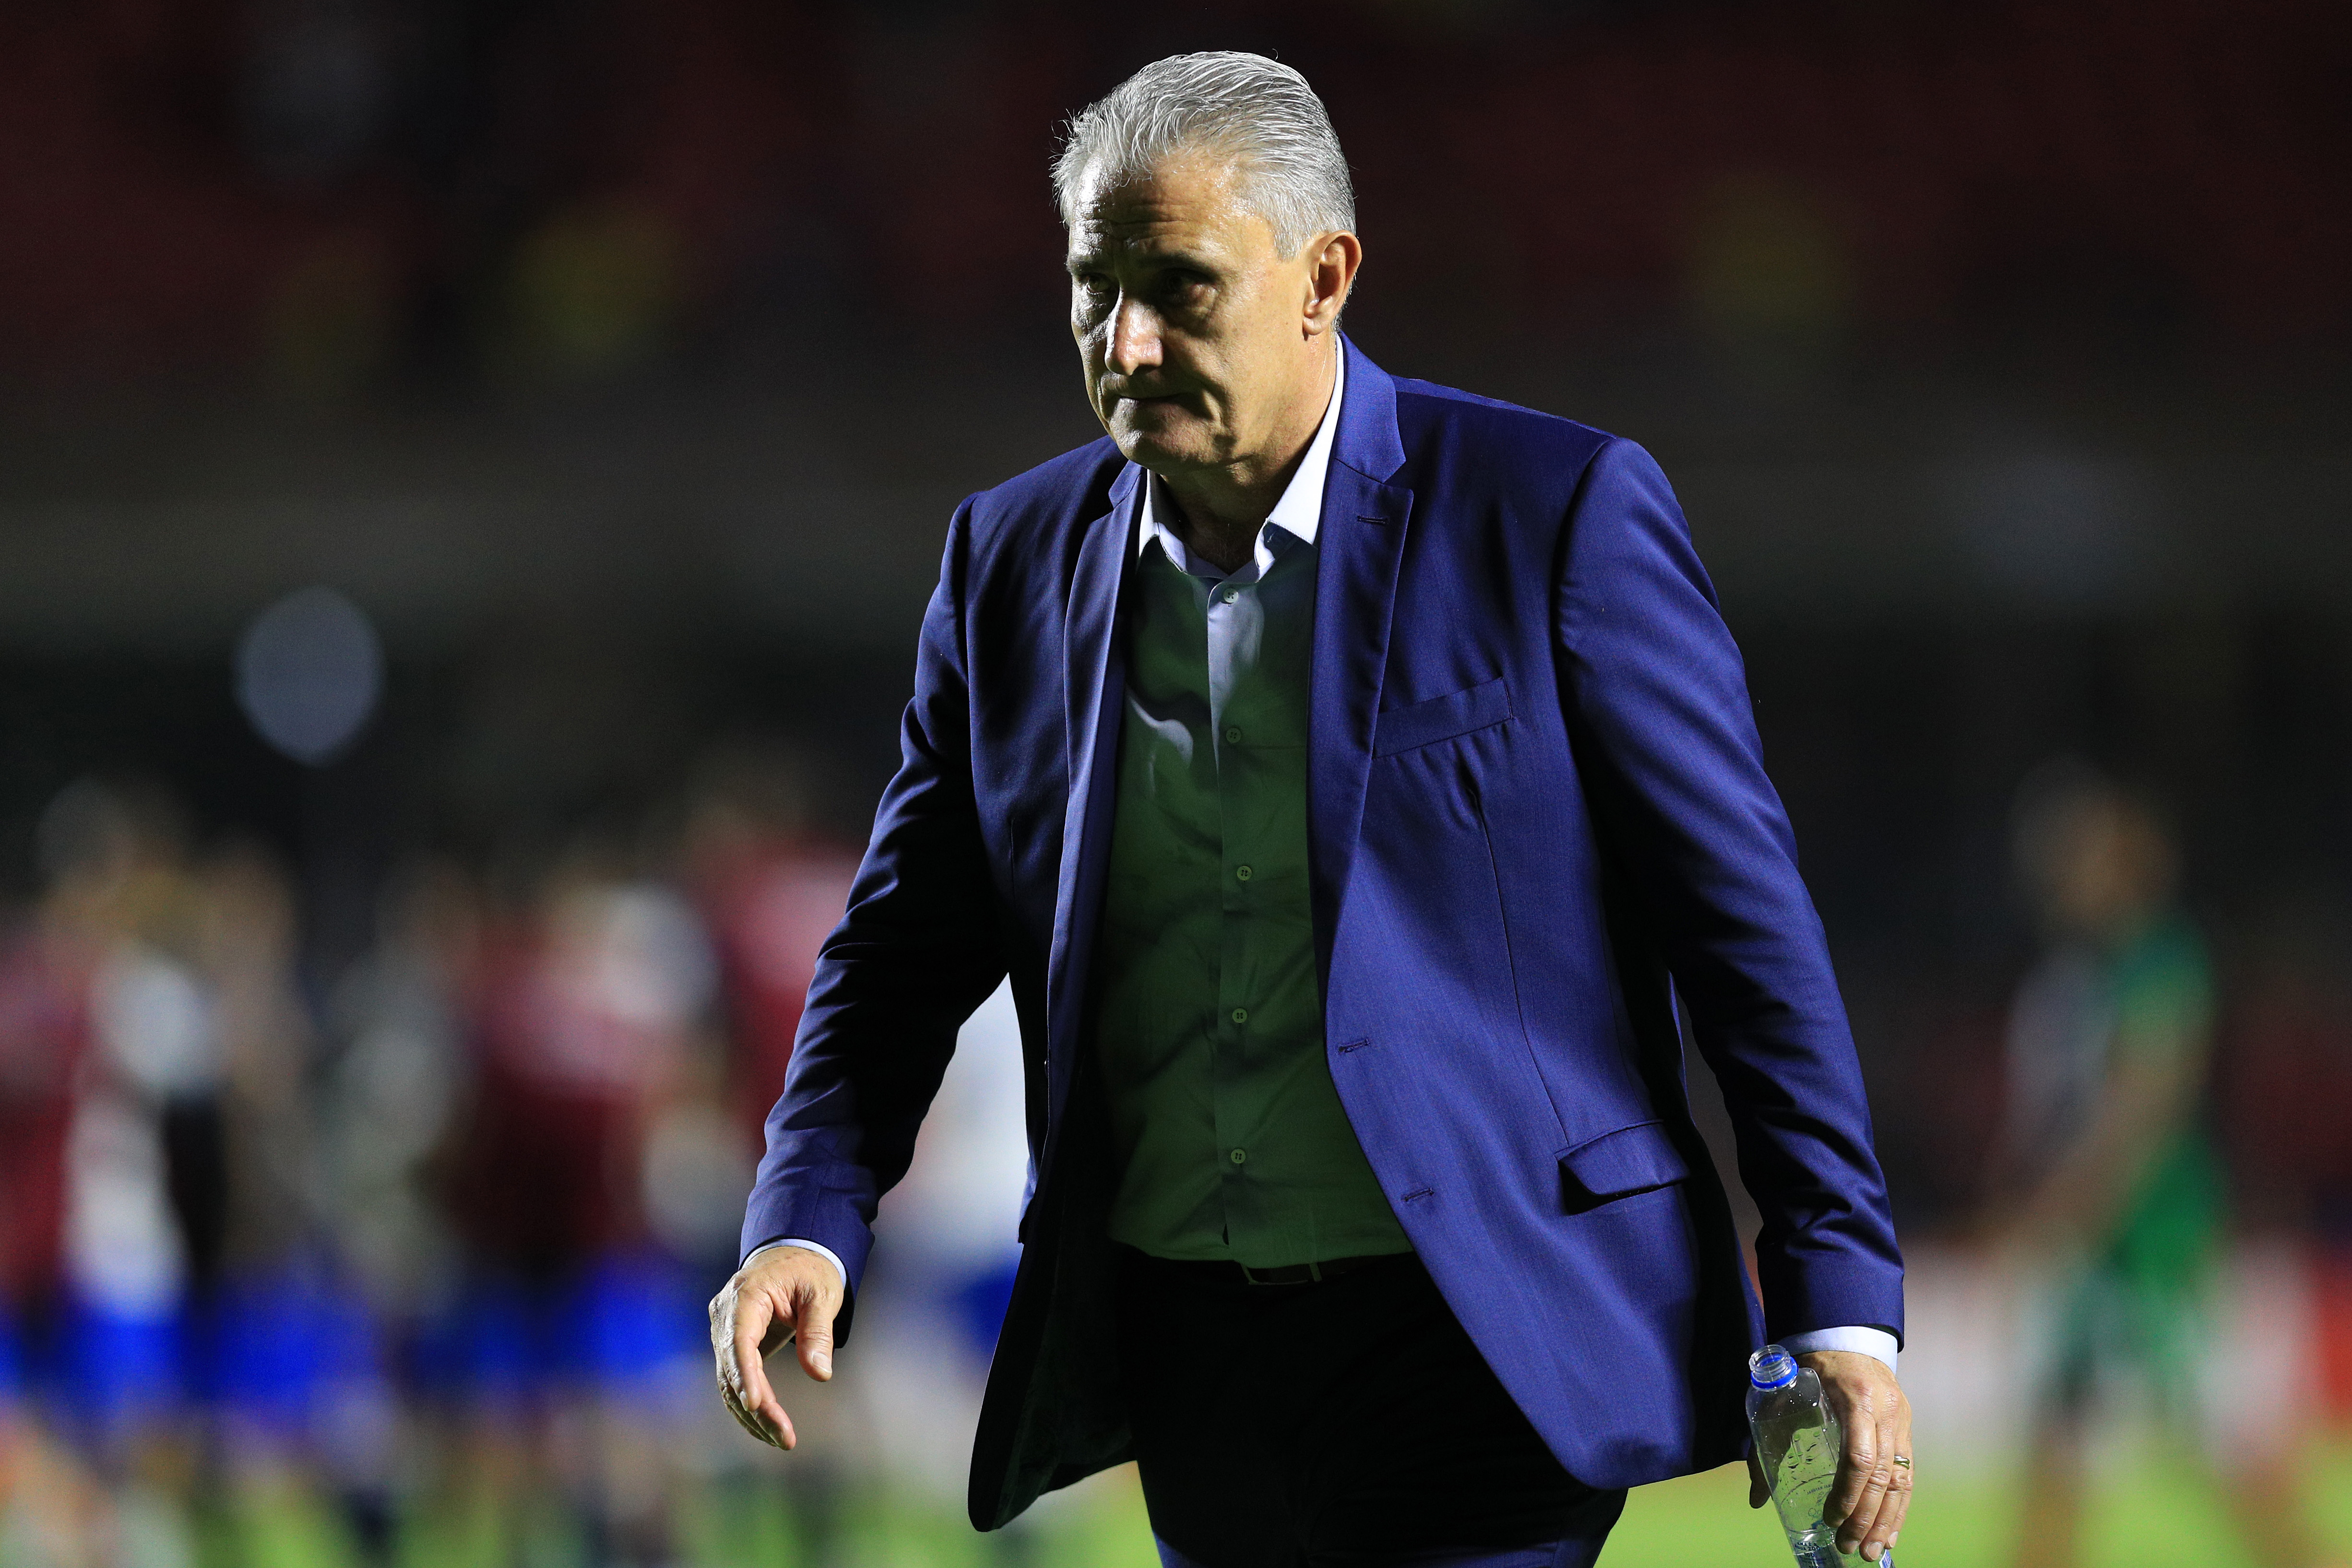 SAO PAULO, BRAZIL - JUNE 14: Tite head coach of Brazil looks on after the Copa America Brazil 2019 group A match between Brazil and Bolivia at Morumbi Stadium on June 14, 2019 in Sao Paulo, Brazil. (Photo by Buda Mendes/Getty Images)